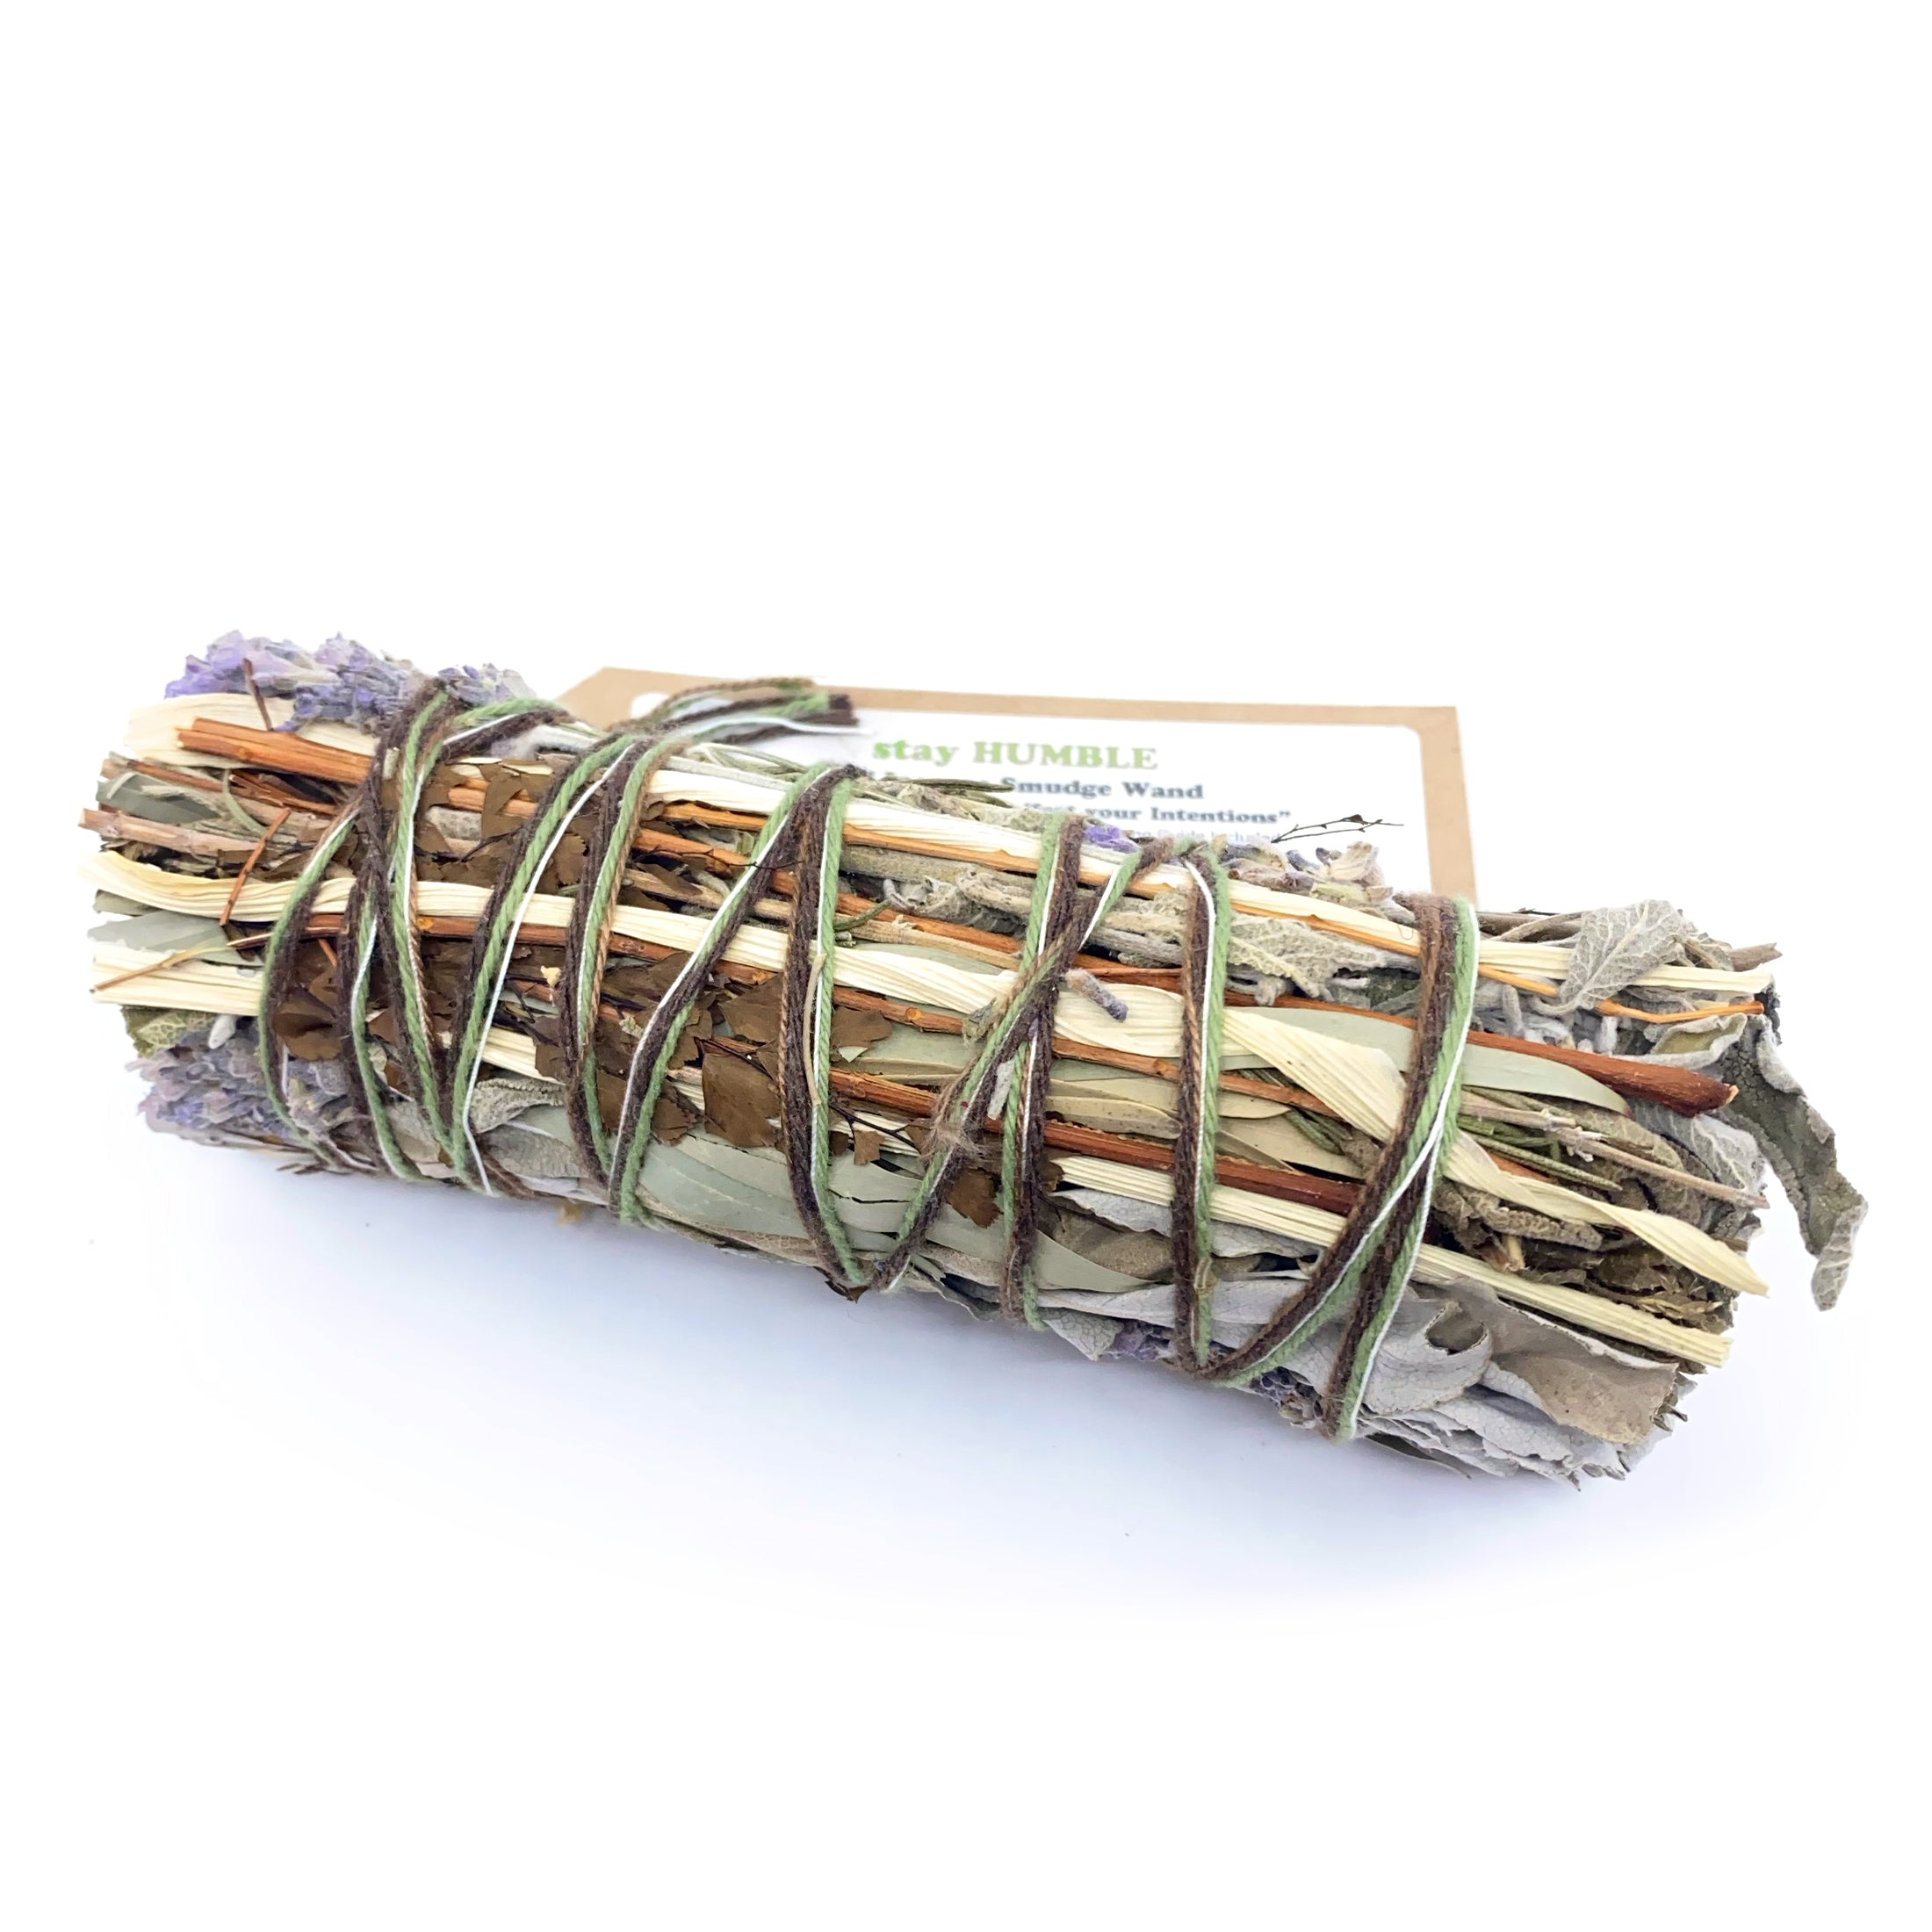 Stay Humble - With Good Intentions Smudge Stick